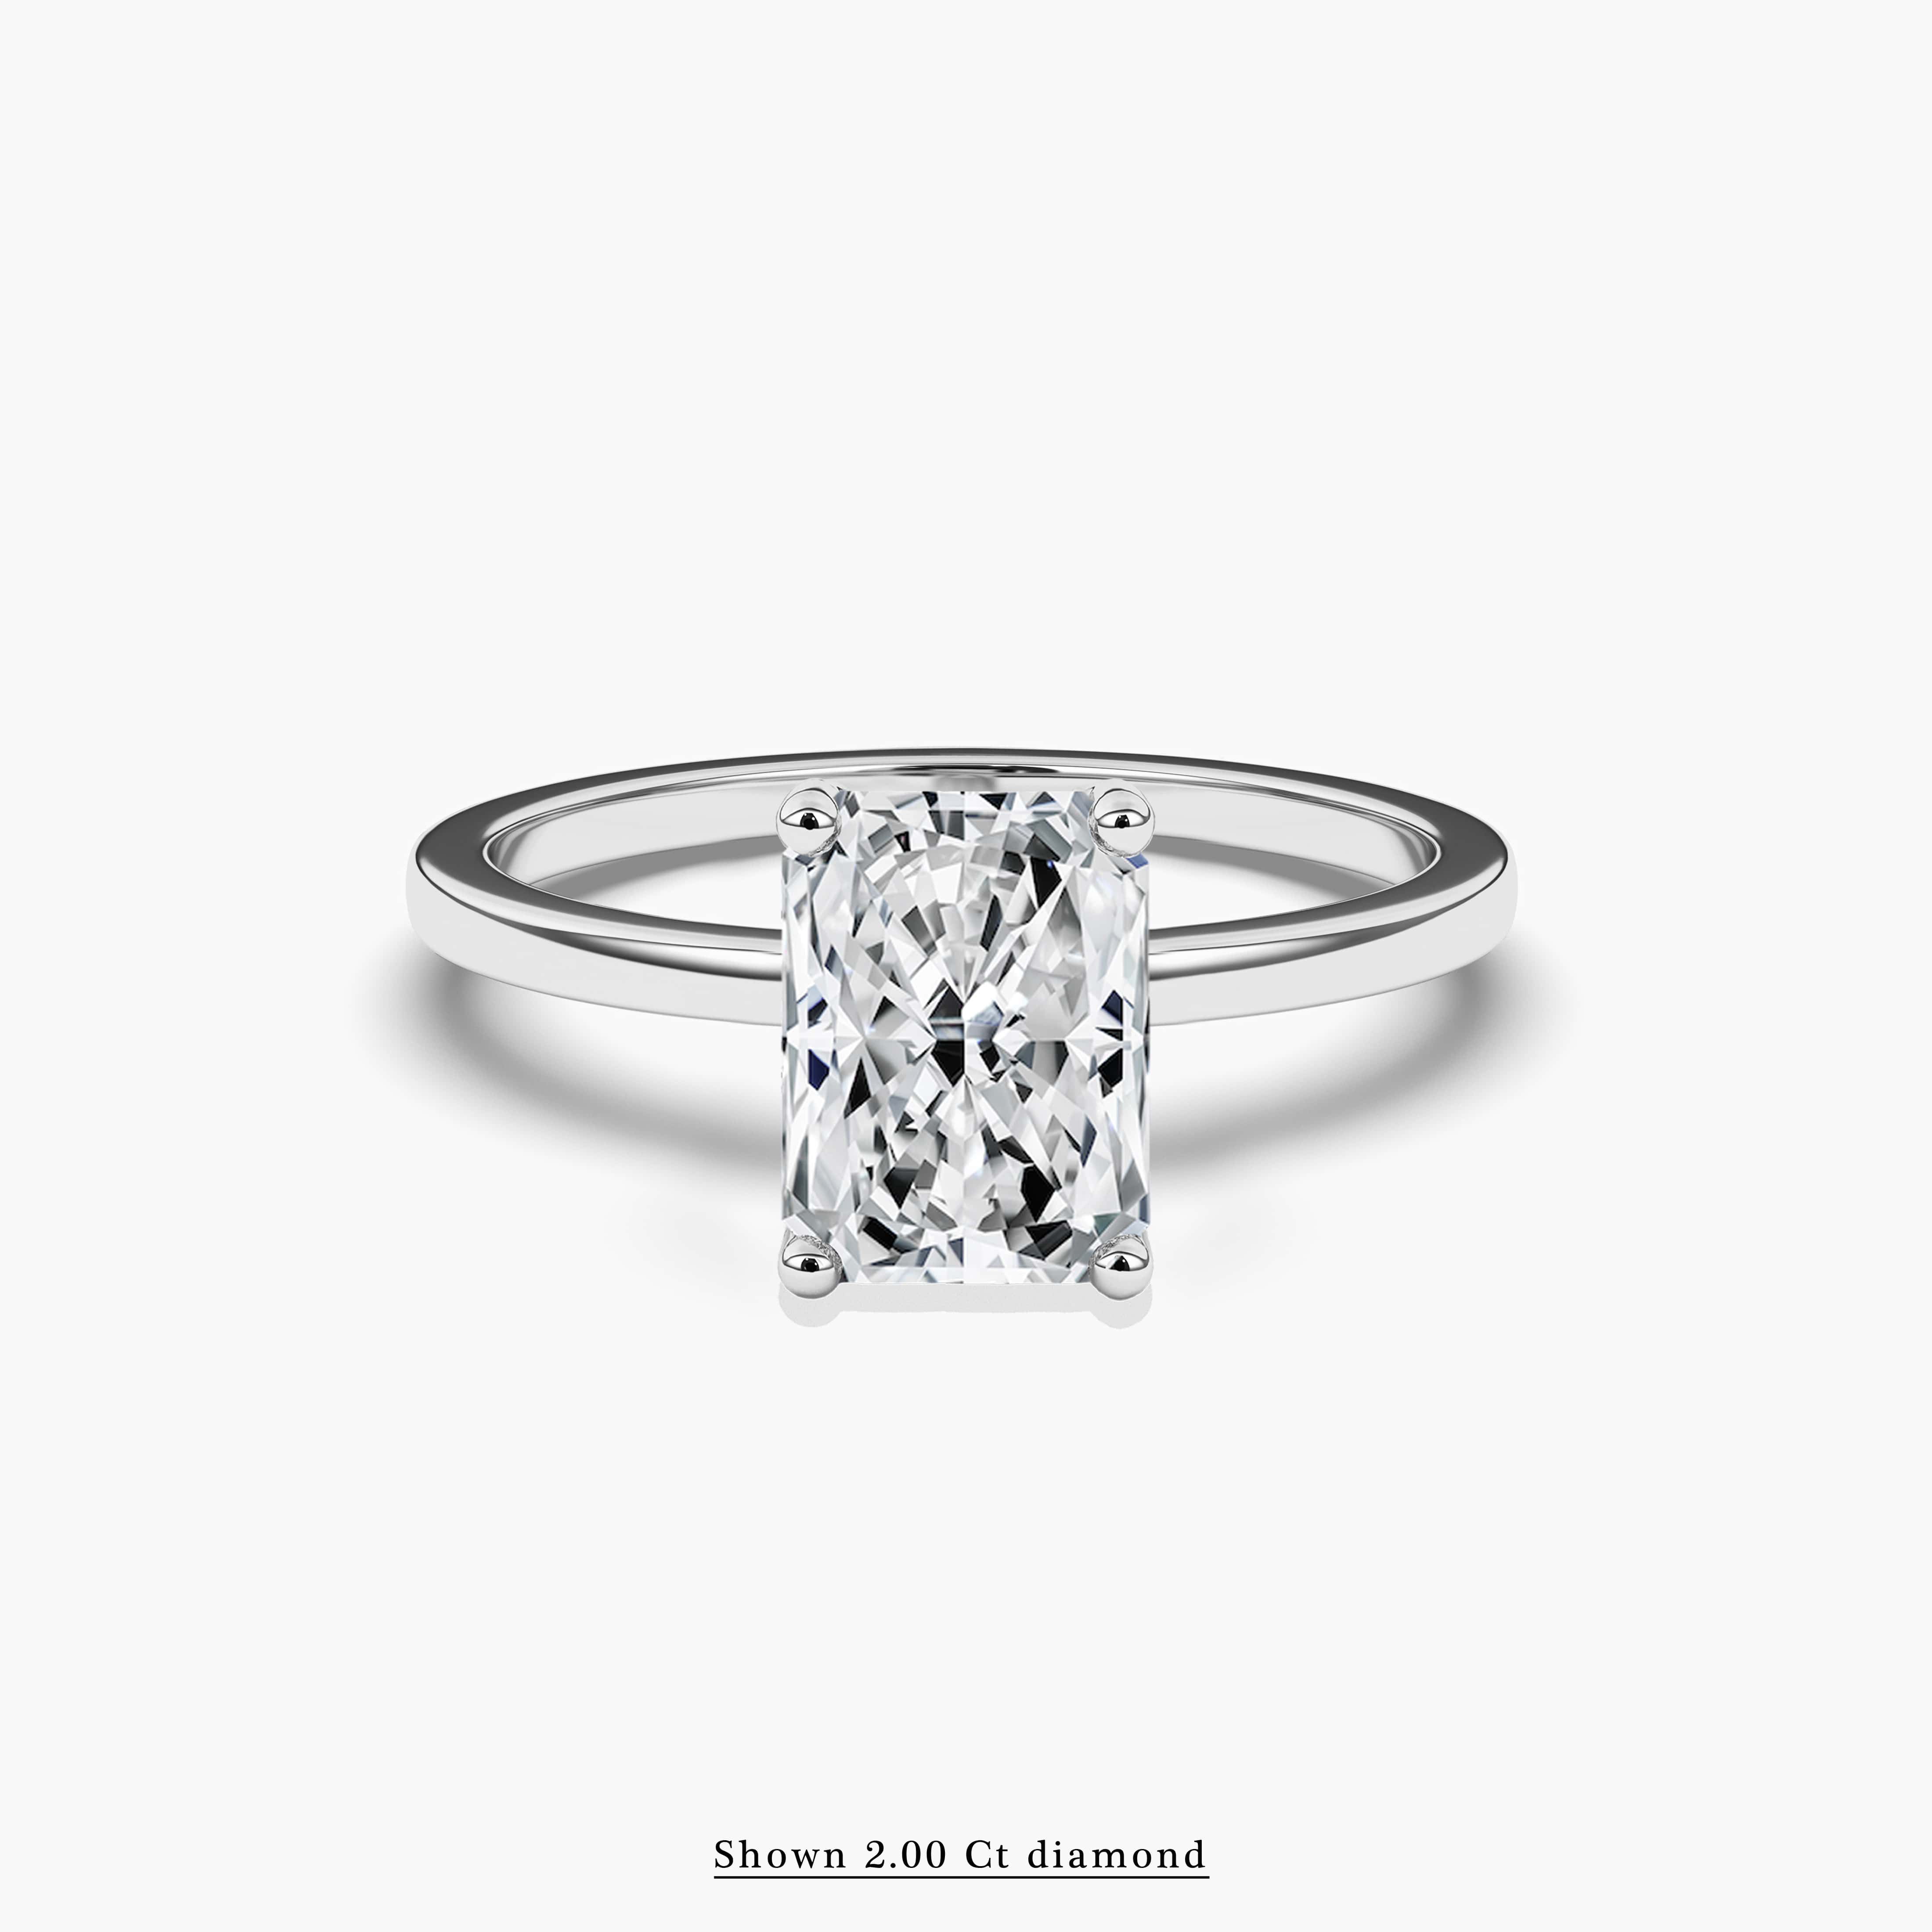 2.00ctw radiant shaped engagement ring in white gold